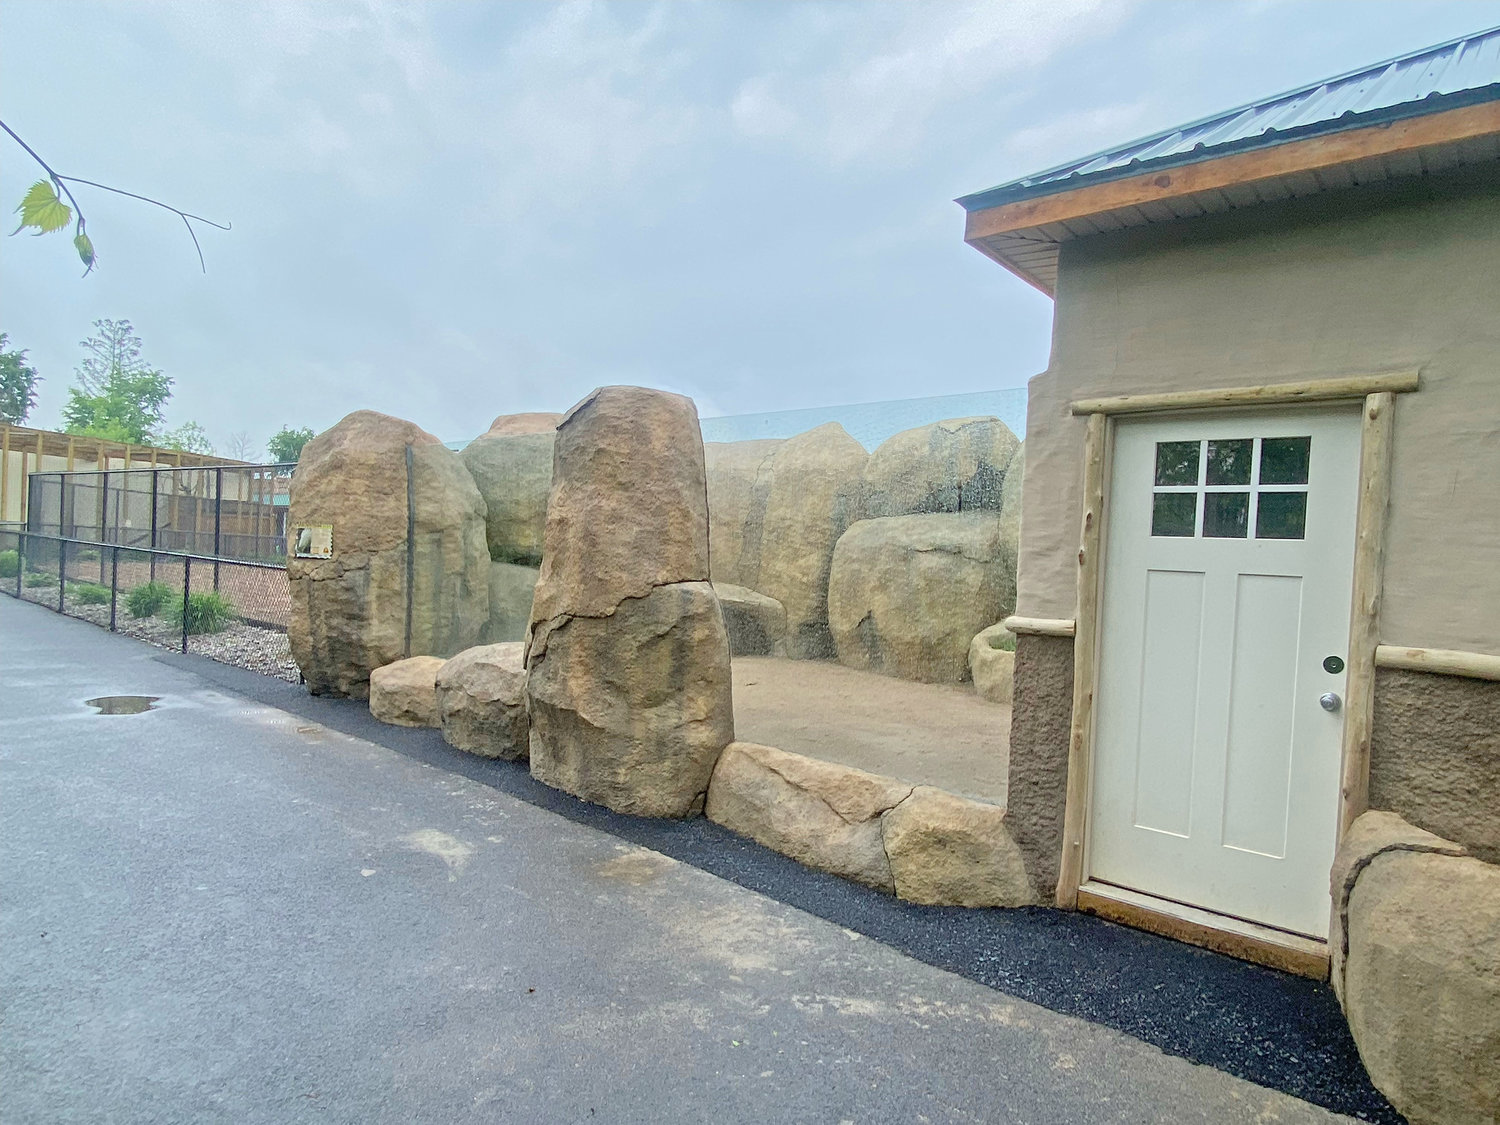 The Wild Animal Park in Chittenango is unveiling four new exhibits this weekend. The exhibits will feature animals from Africa. Specifically, the Southern Ground Hornbill, the Warthog, Lemurs, and the Albino African Porcupine.